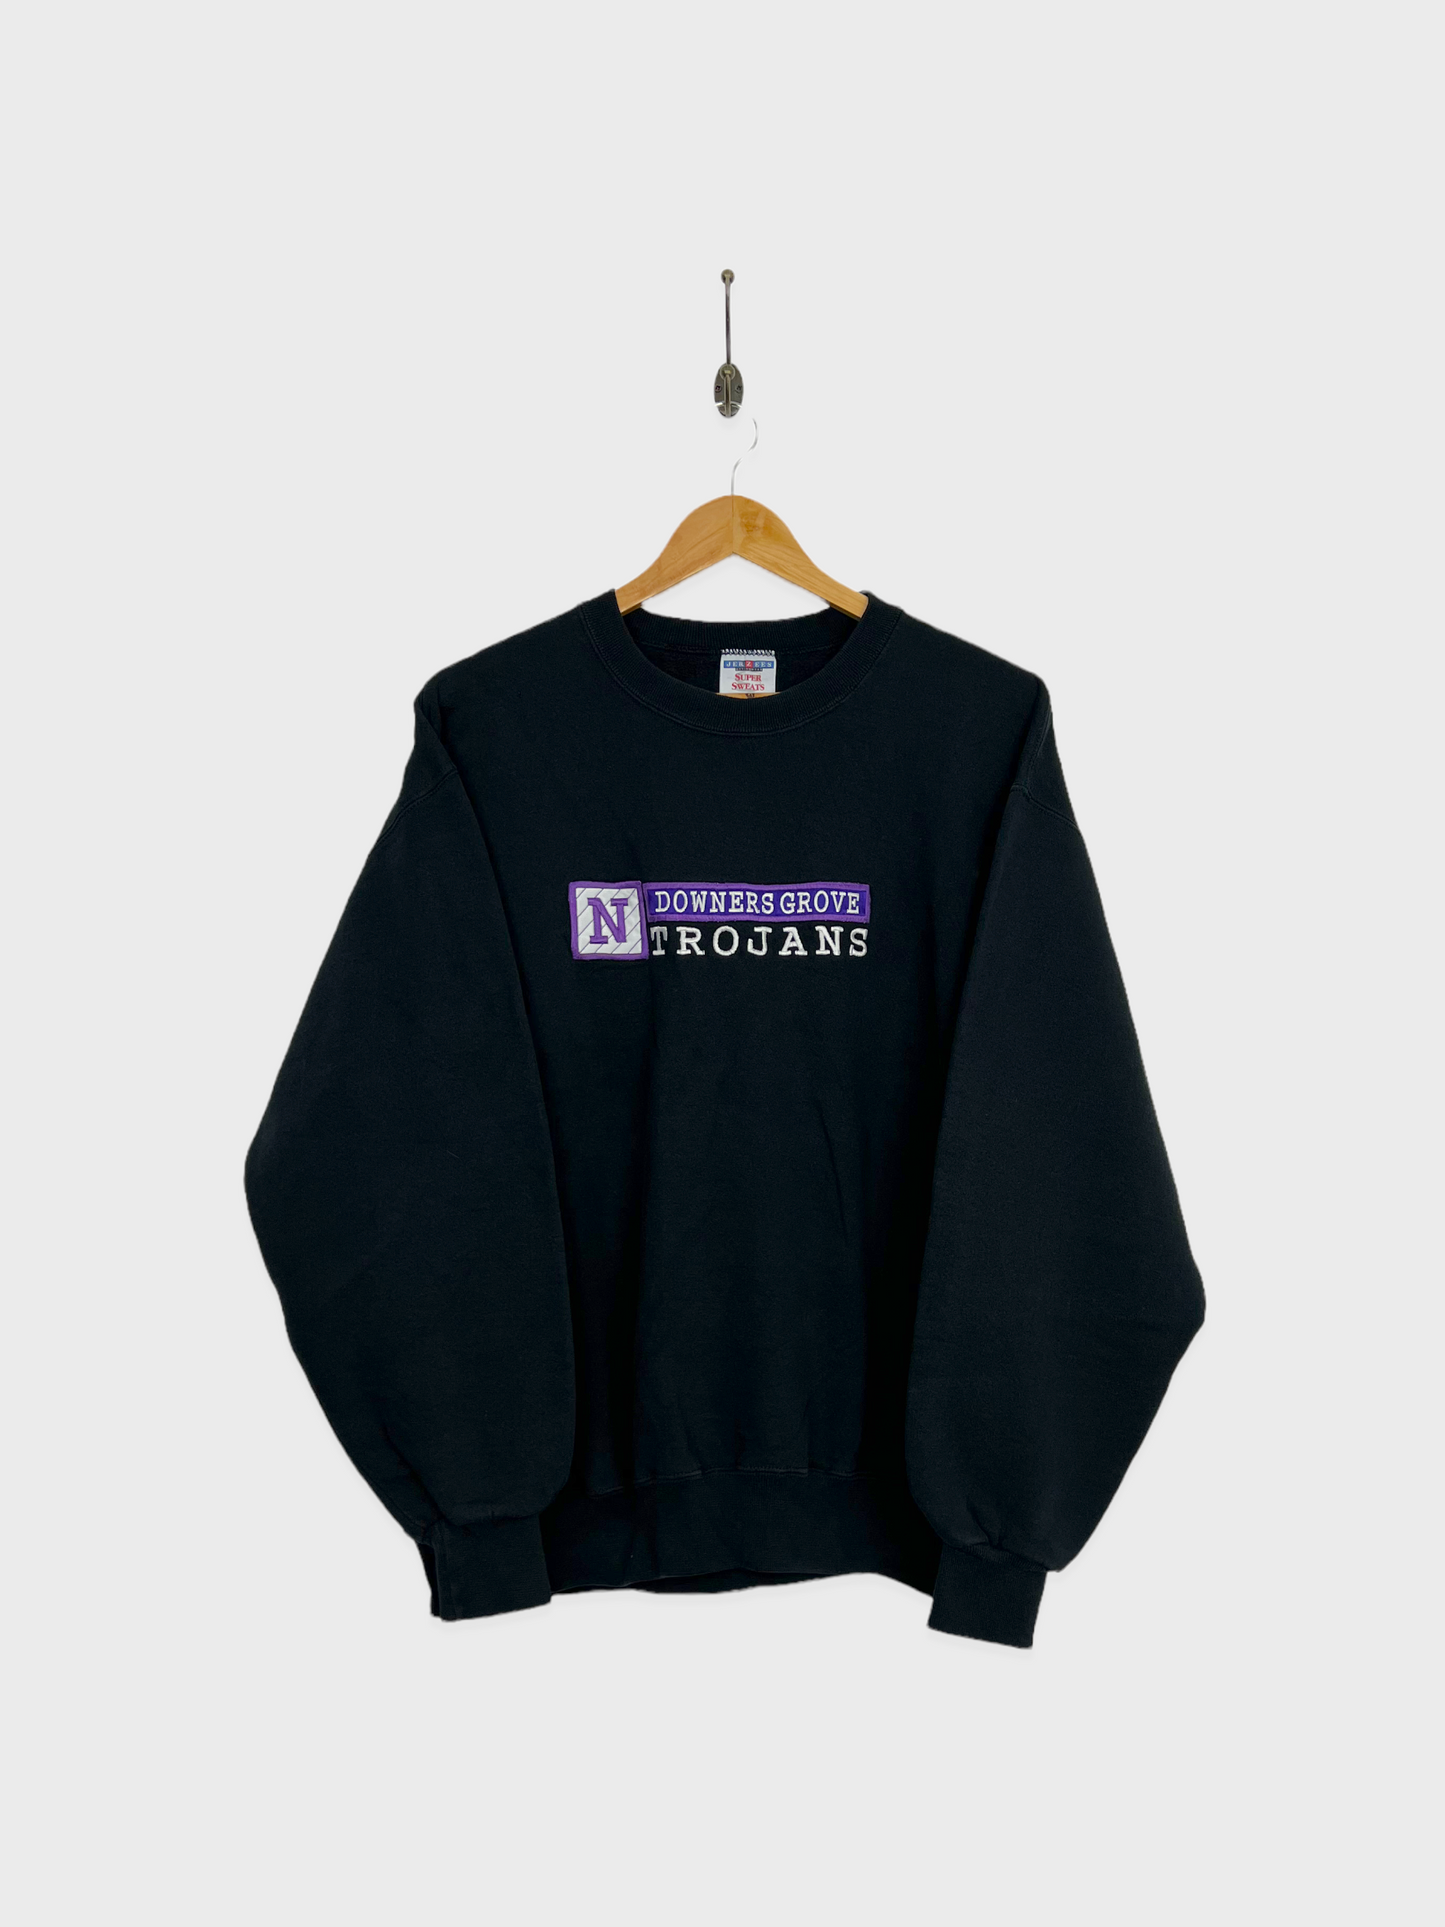 90's Downers Grove Trojans USA Made Embroidered Vintage Sweatshirt Size 10-12